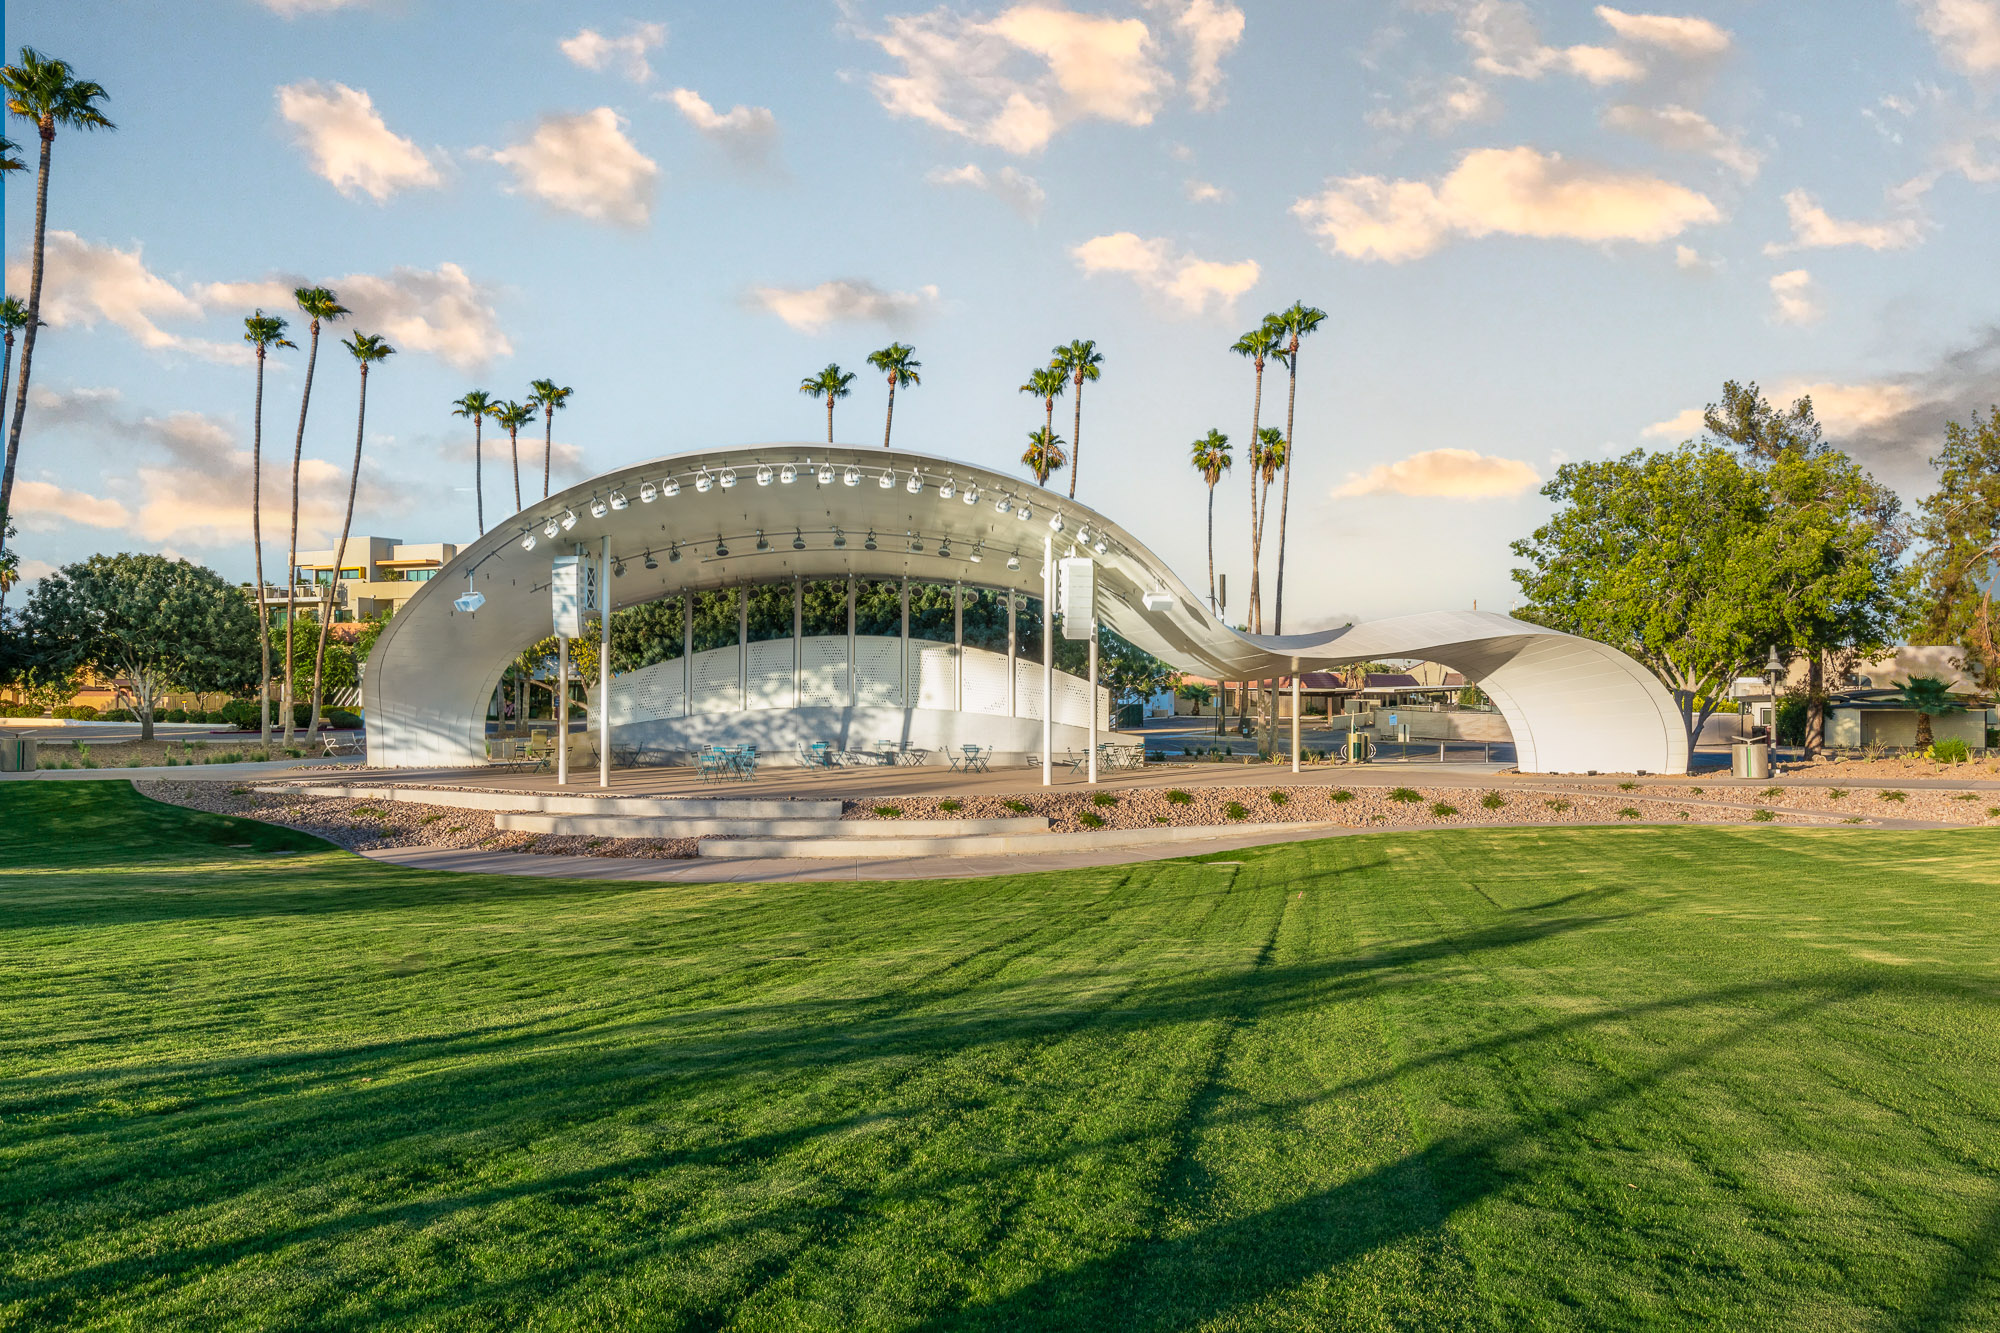 A large white structure situated in the heart of an expansive grassy field, serving as a focal point for recreation development in urban parks.